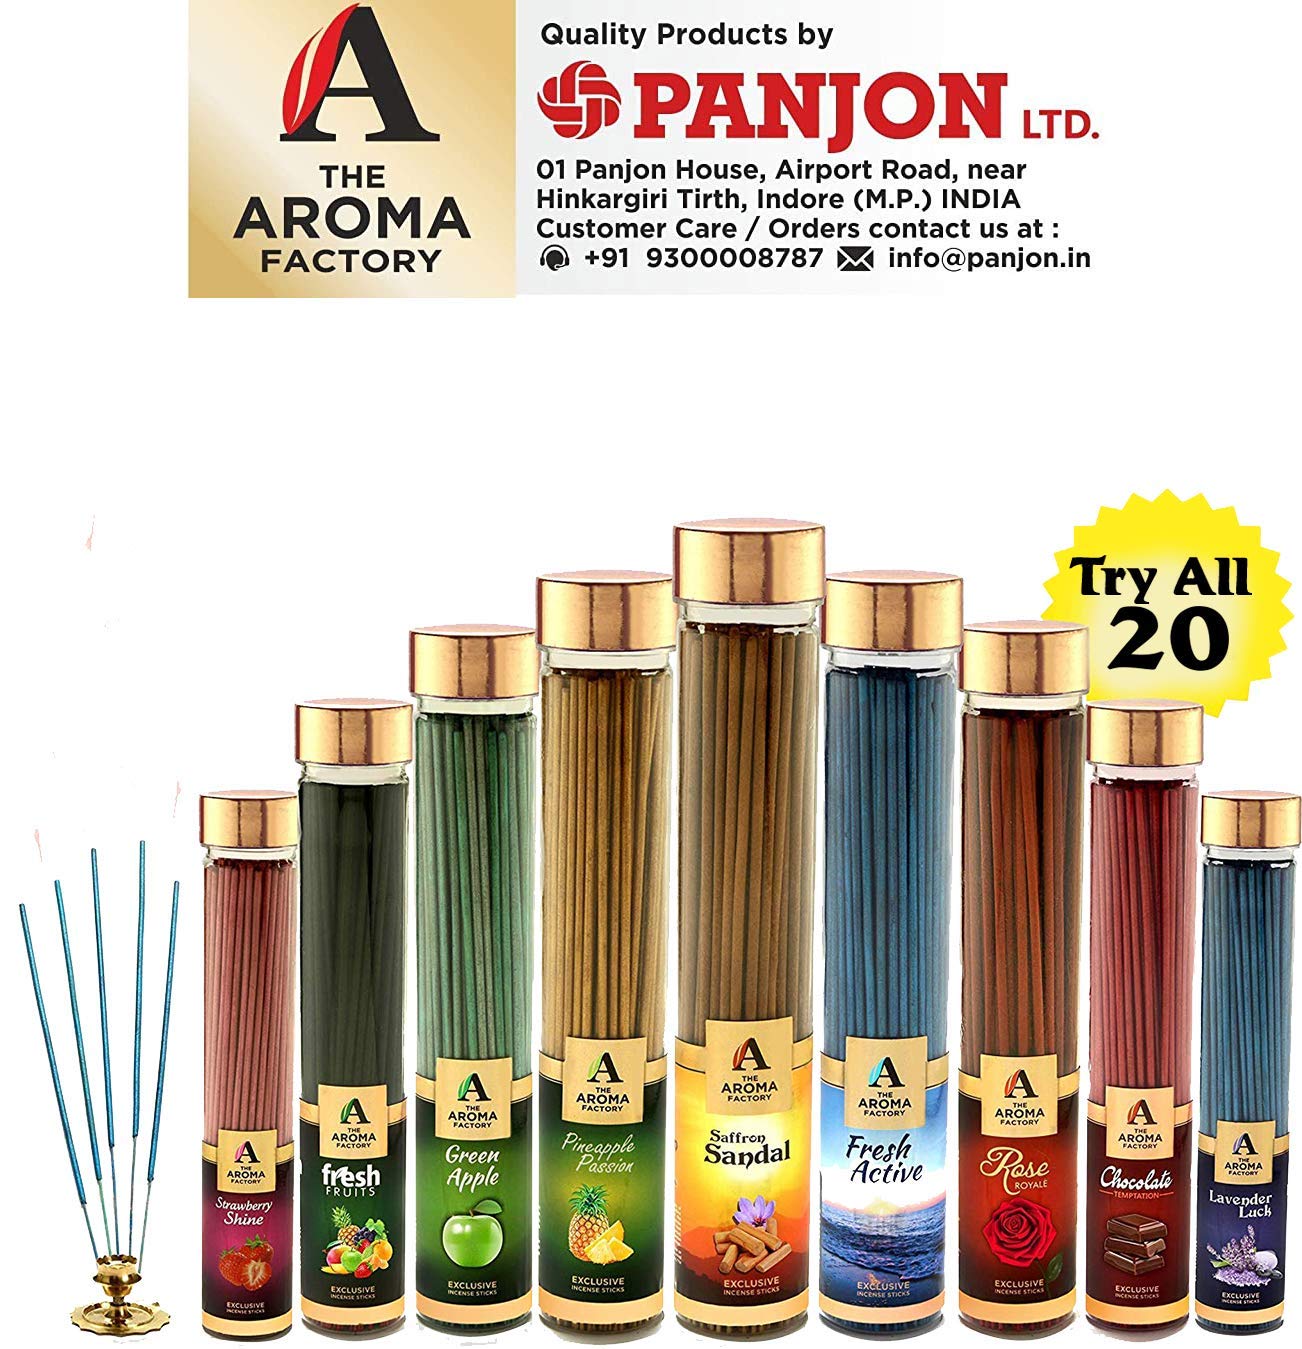 The Aroma Factory Chocolate & Mogra Agarbatti (Charcoal Free & Low Smoke) Bottle Pack of 2 x 100